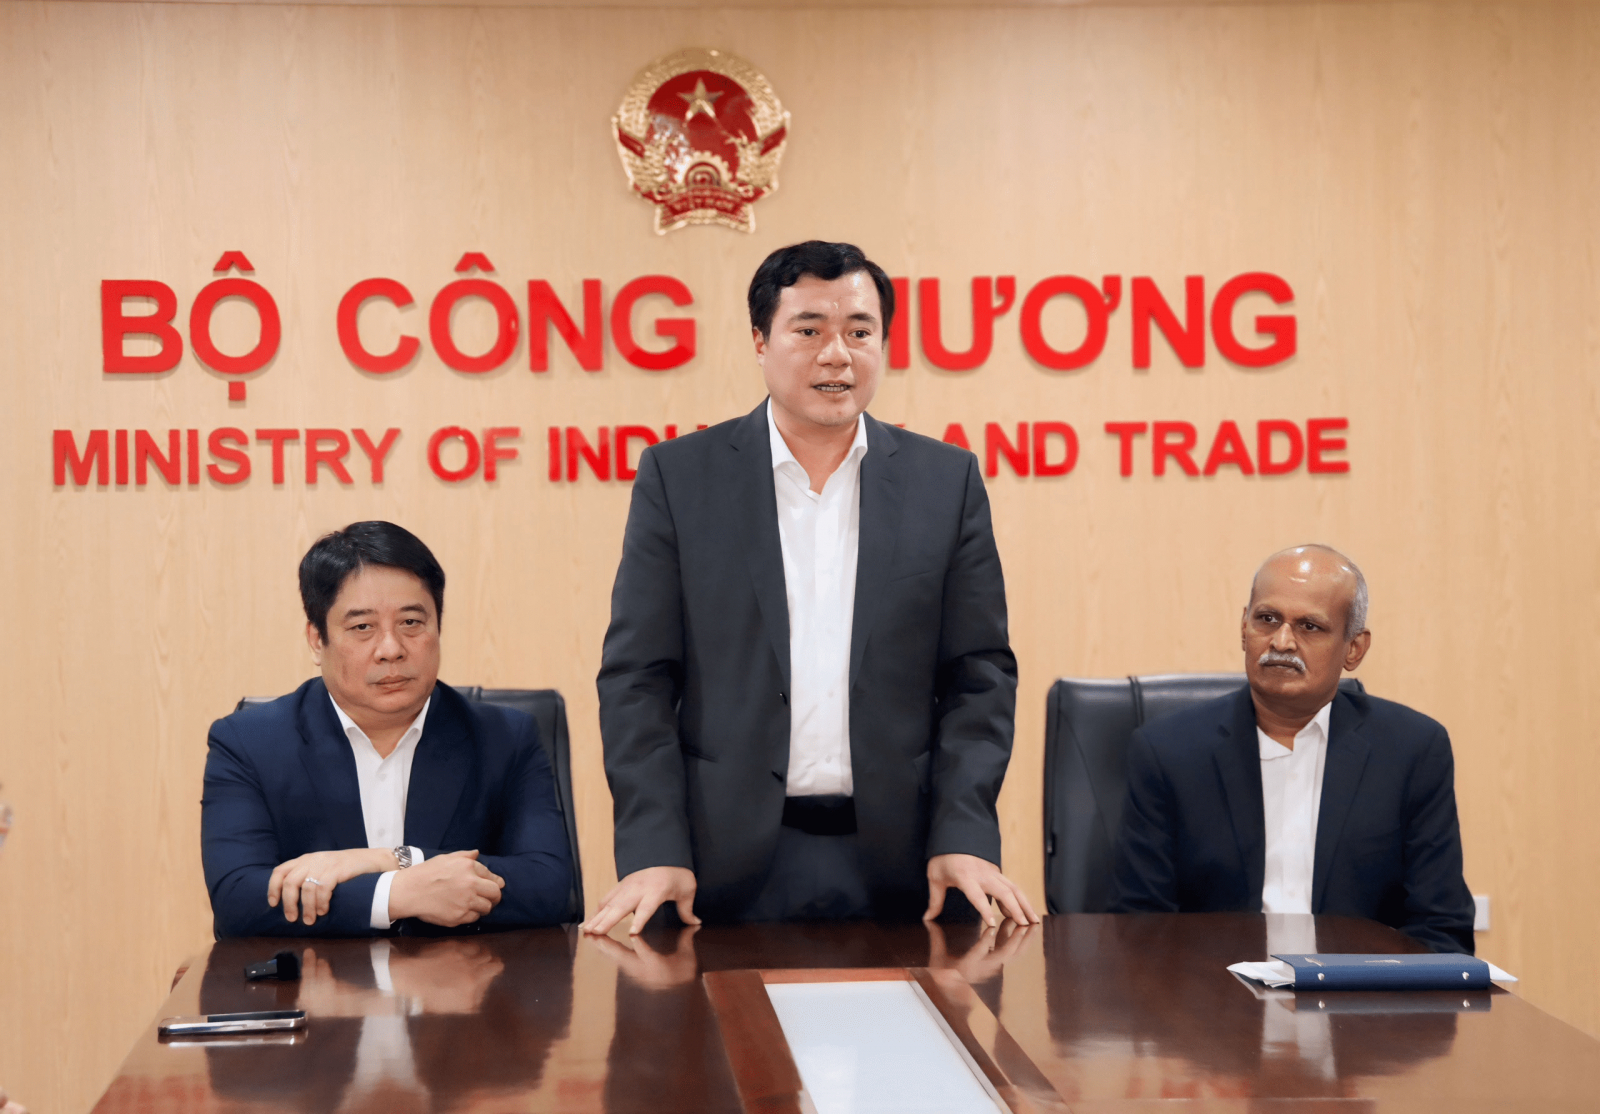 Deputy Minister of Industry and Trade Nguyen Sinh Nhat Tan (standing) at the signing ceremony in Hanoi on March 1, 2024. Photo courtesy of the Ministry of Industry and Trade.